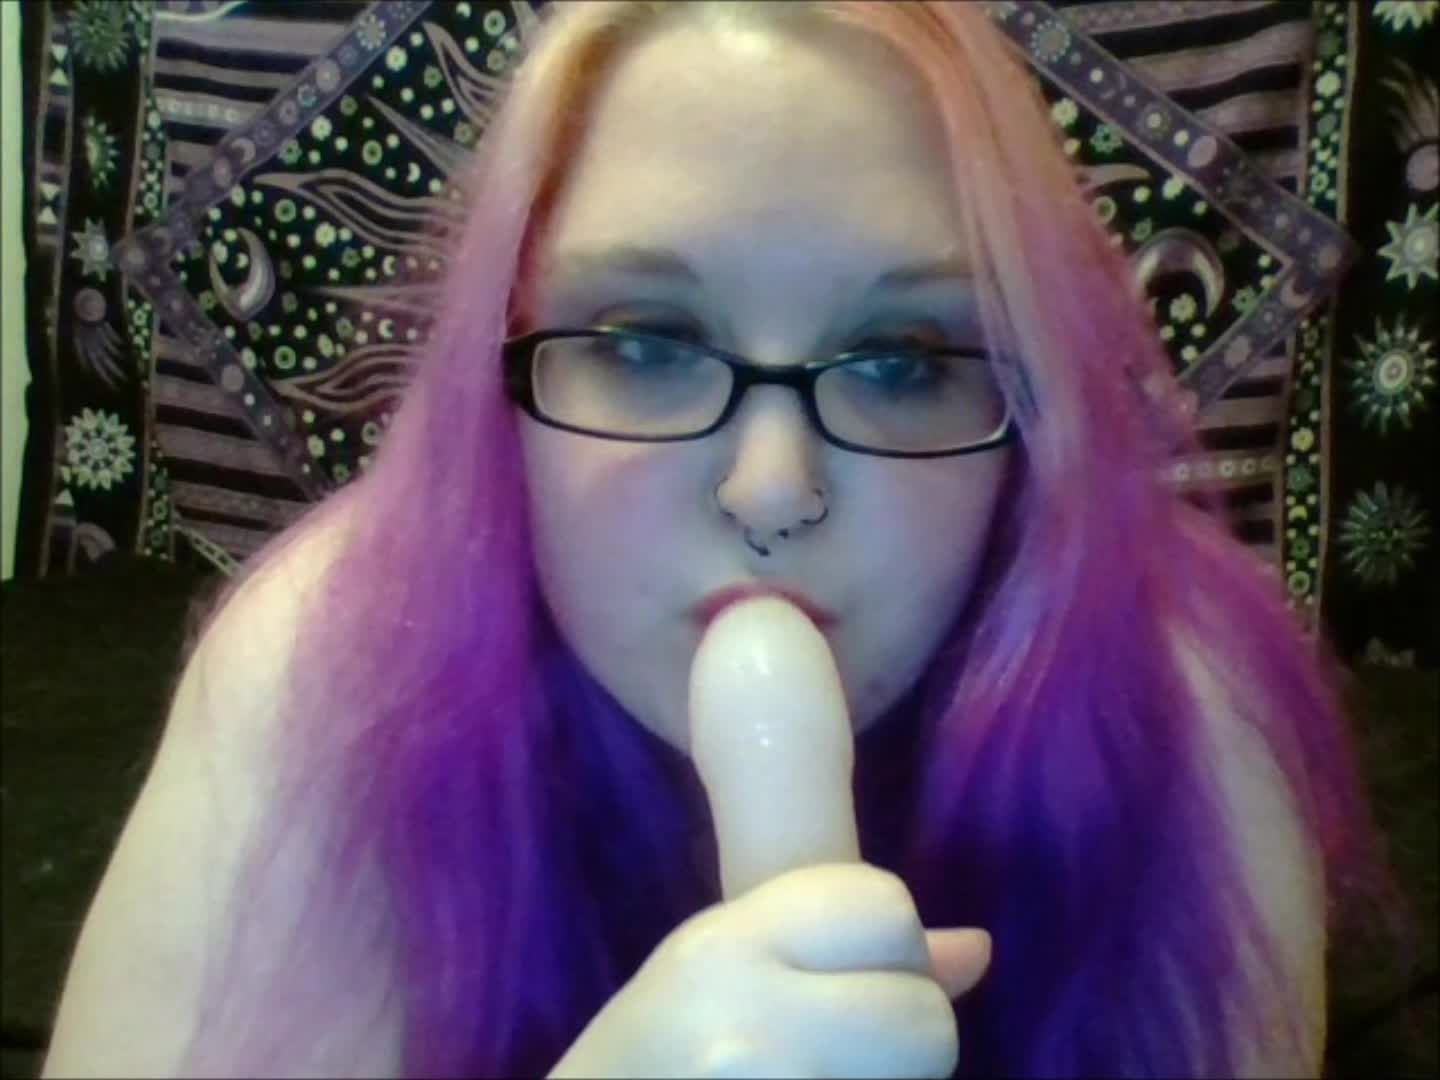 Blowing My Tantus Uncut: My First Video